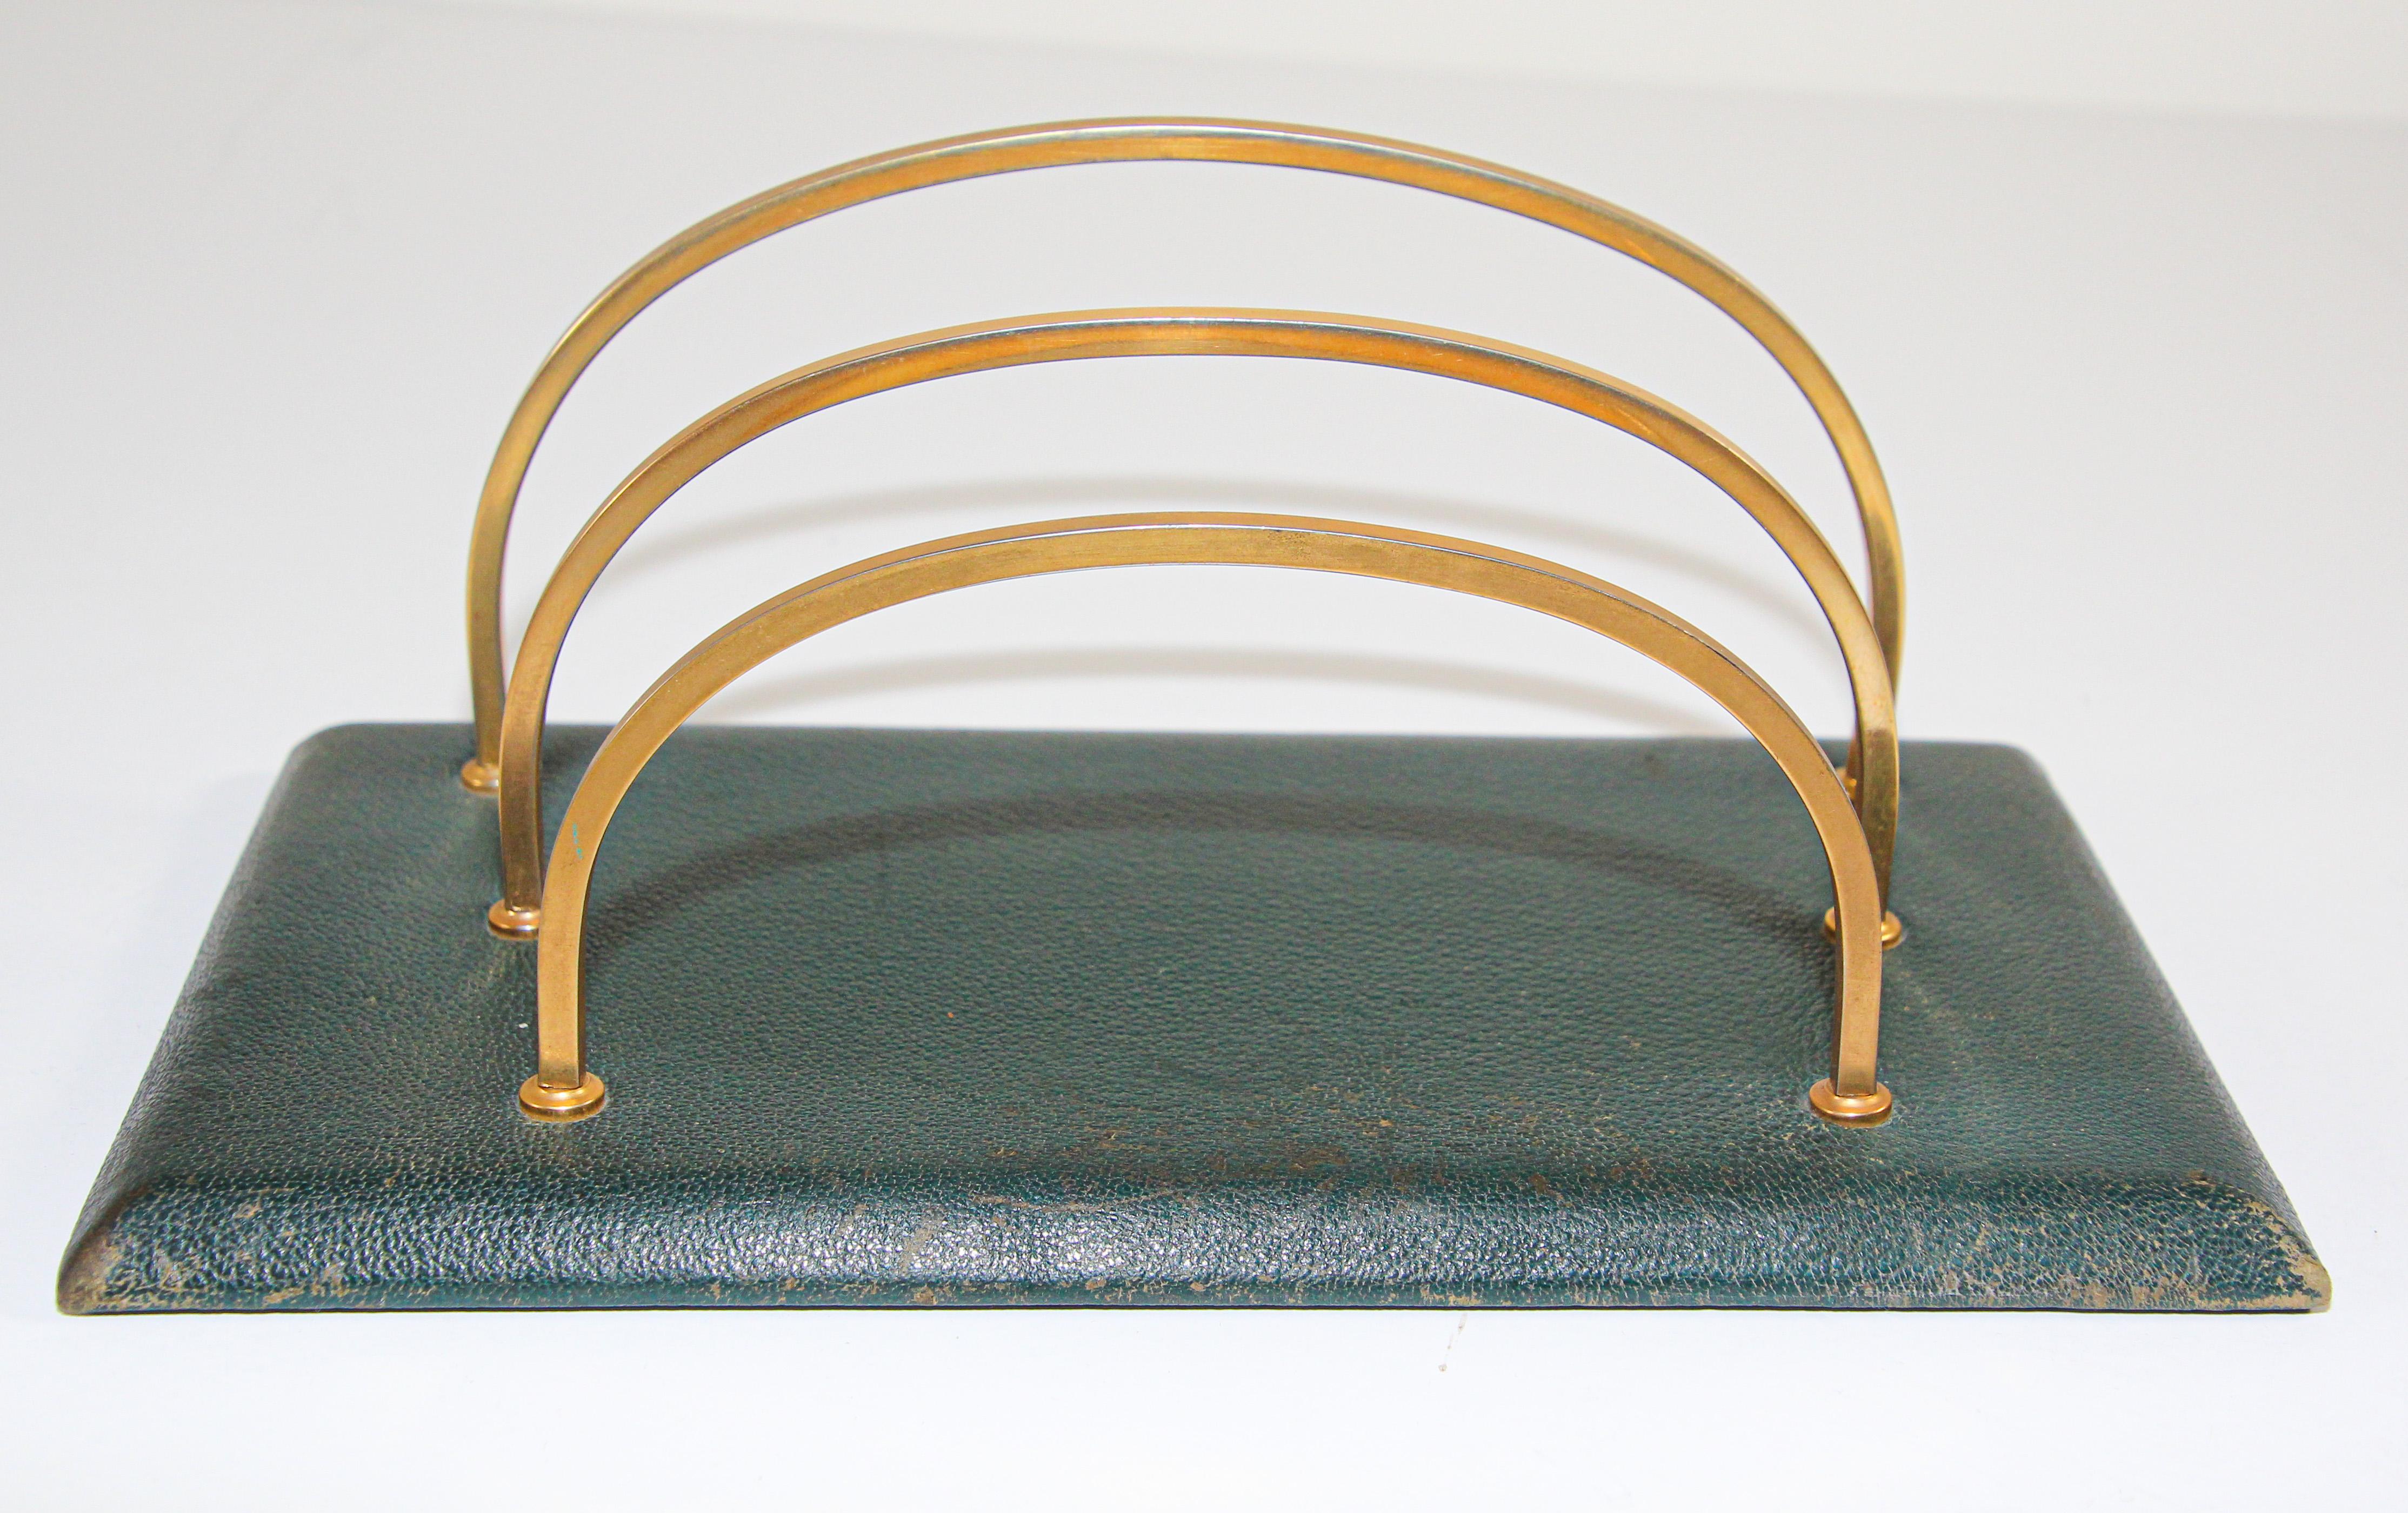 Adnet Art Deco style green leather and brass letter rack holder.
The leather rack is handcrafted and exquisitely executed using brass elements which gives the rack a luxury finish.
The leather is in great vintage condition in the style of Jacques